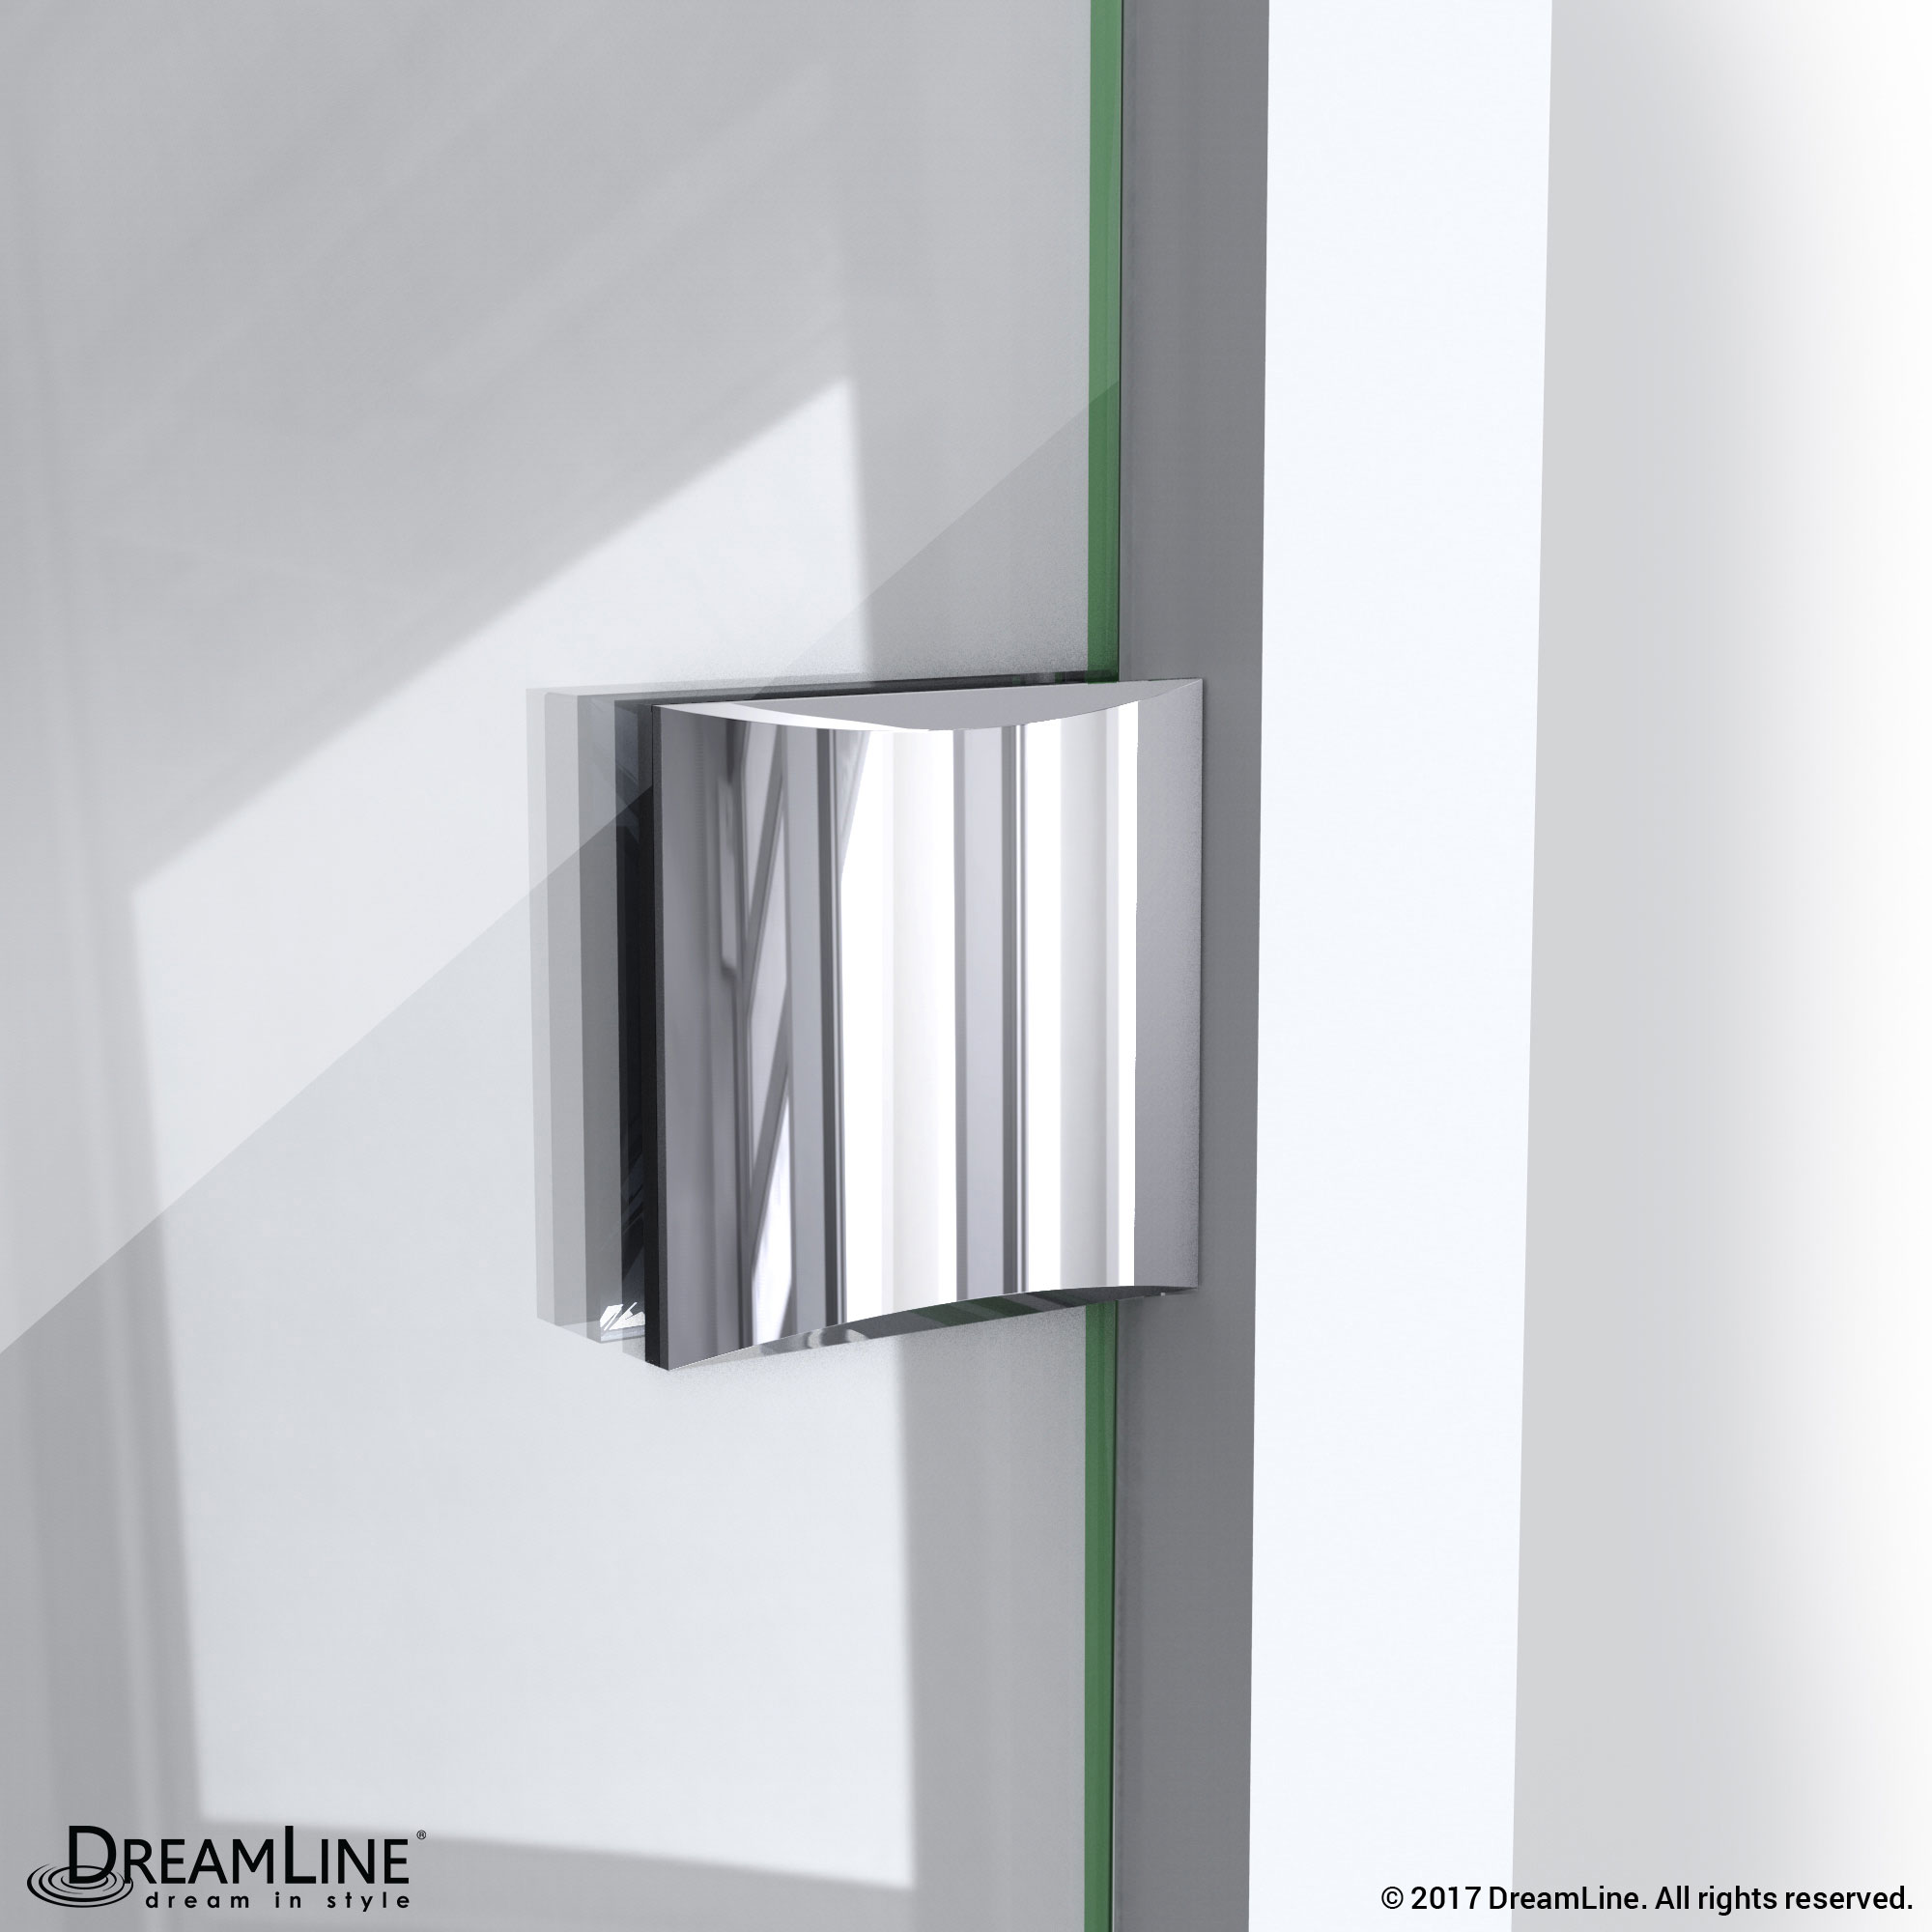 DreamLine Prism Lux 36 in. D x 36 in. W x 74 3/4 in. H Hinged Shower Enclosure in Chrome with Corner Drain White Base Kit